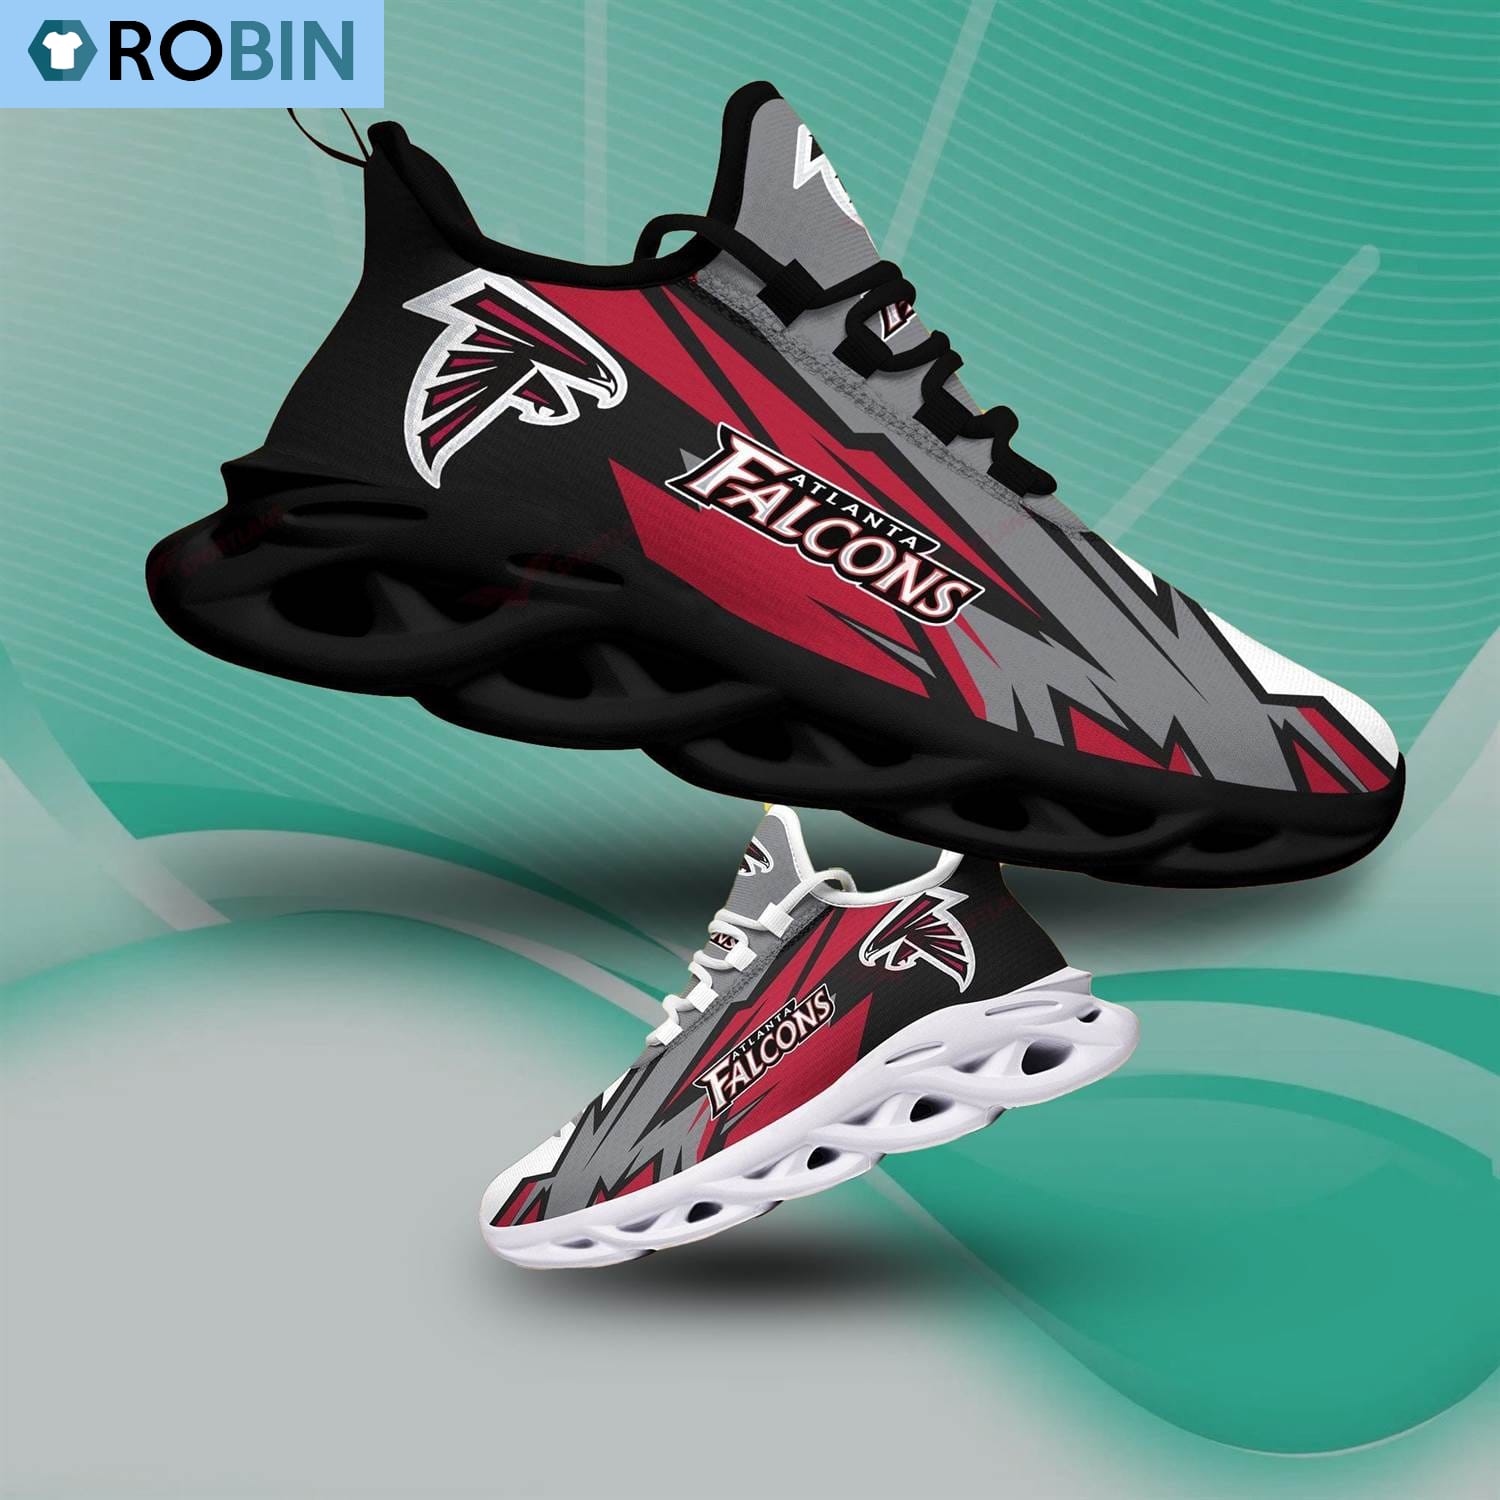 Atlanta Falcons Chunky Sneakers, NFL Gift For Fans